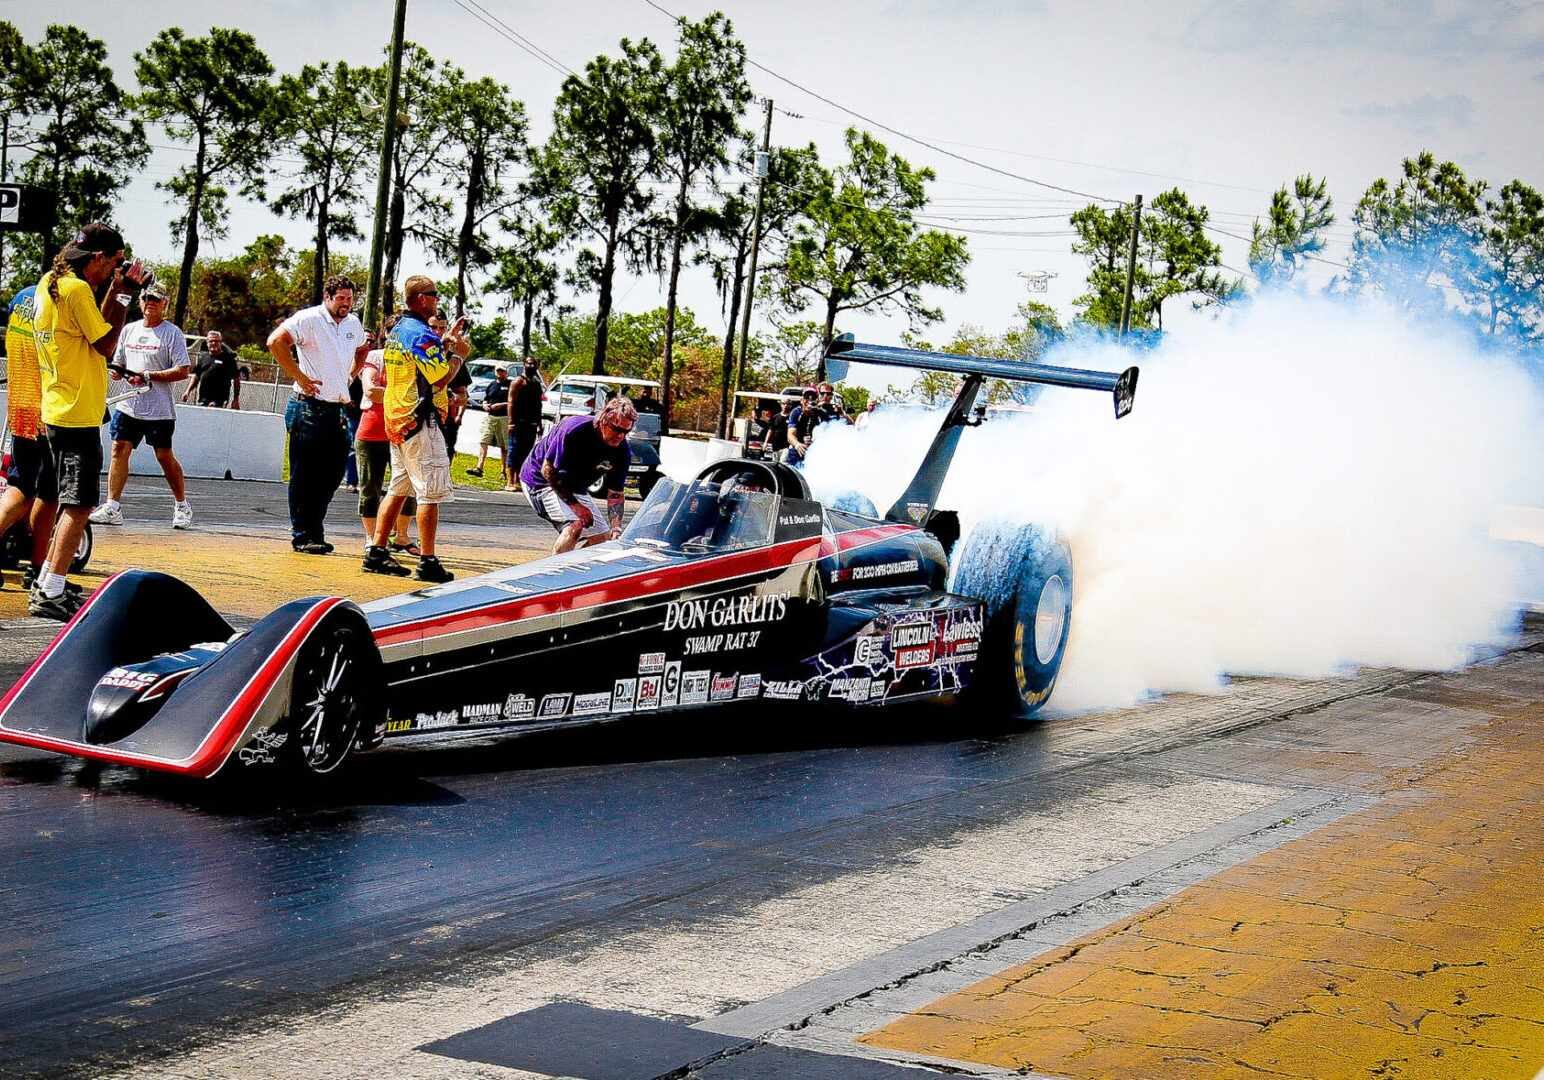 A high-performance drag racing car emitting billows of smoke as it accelerates down the track.